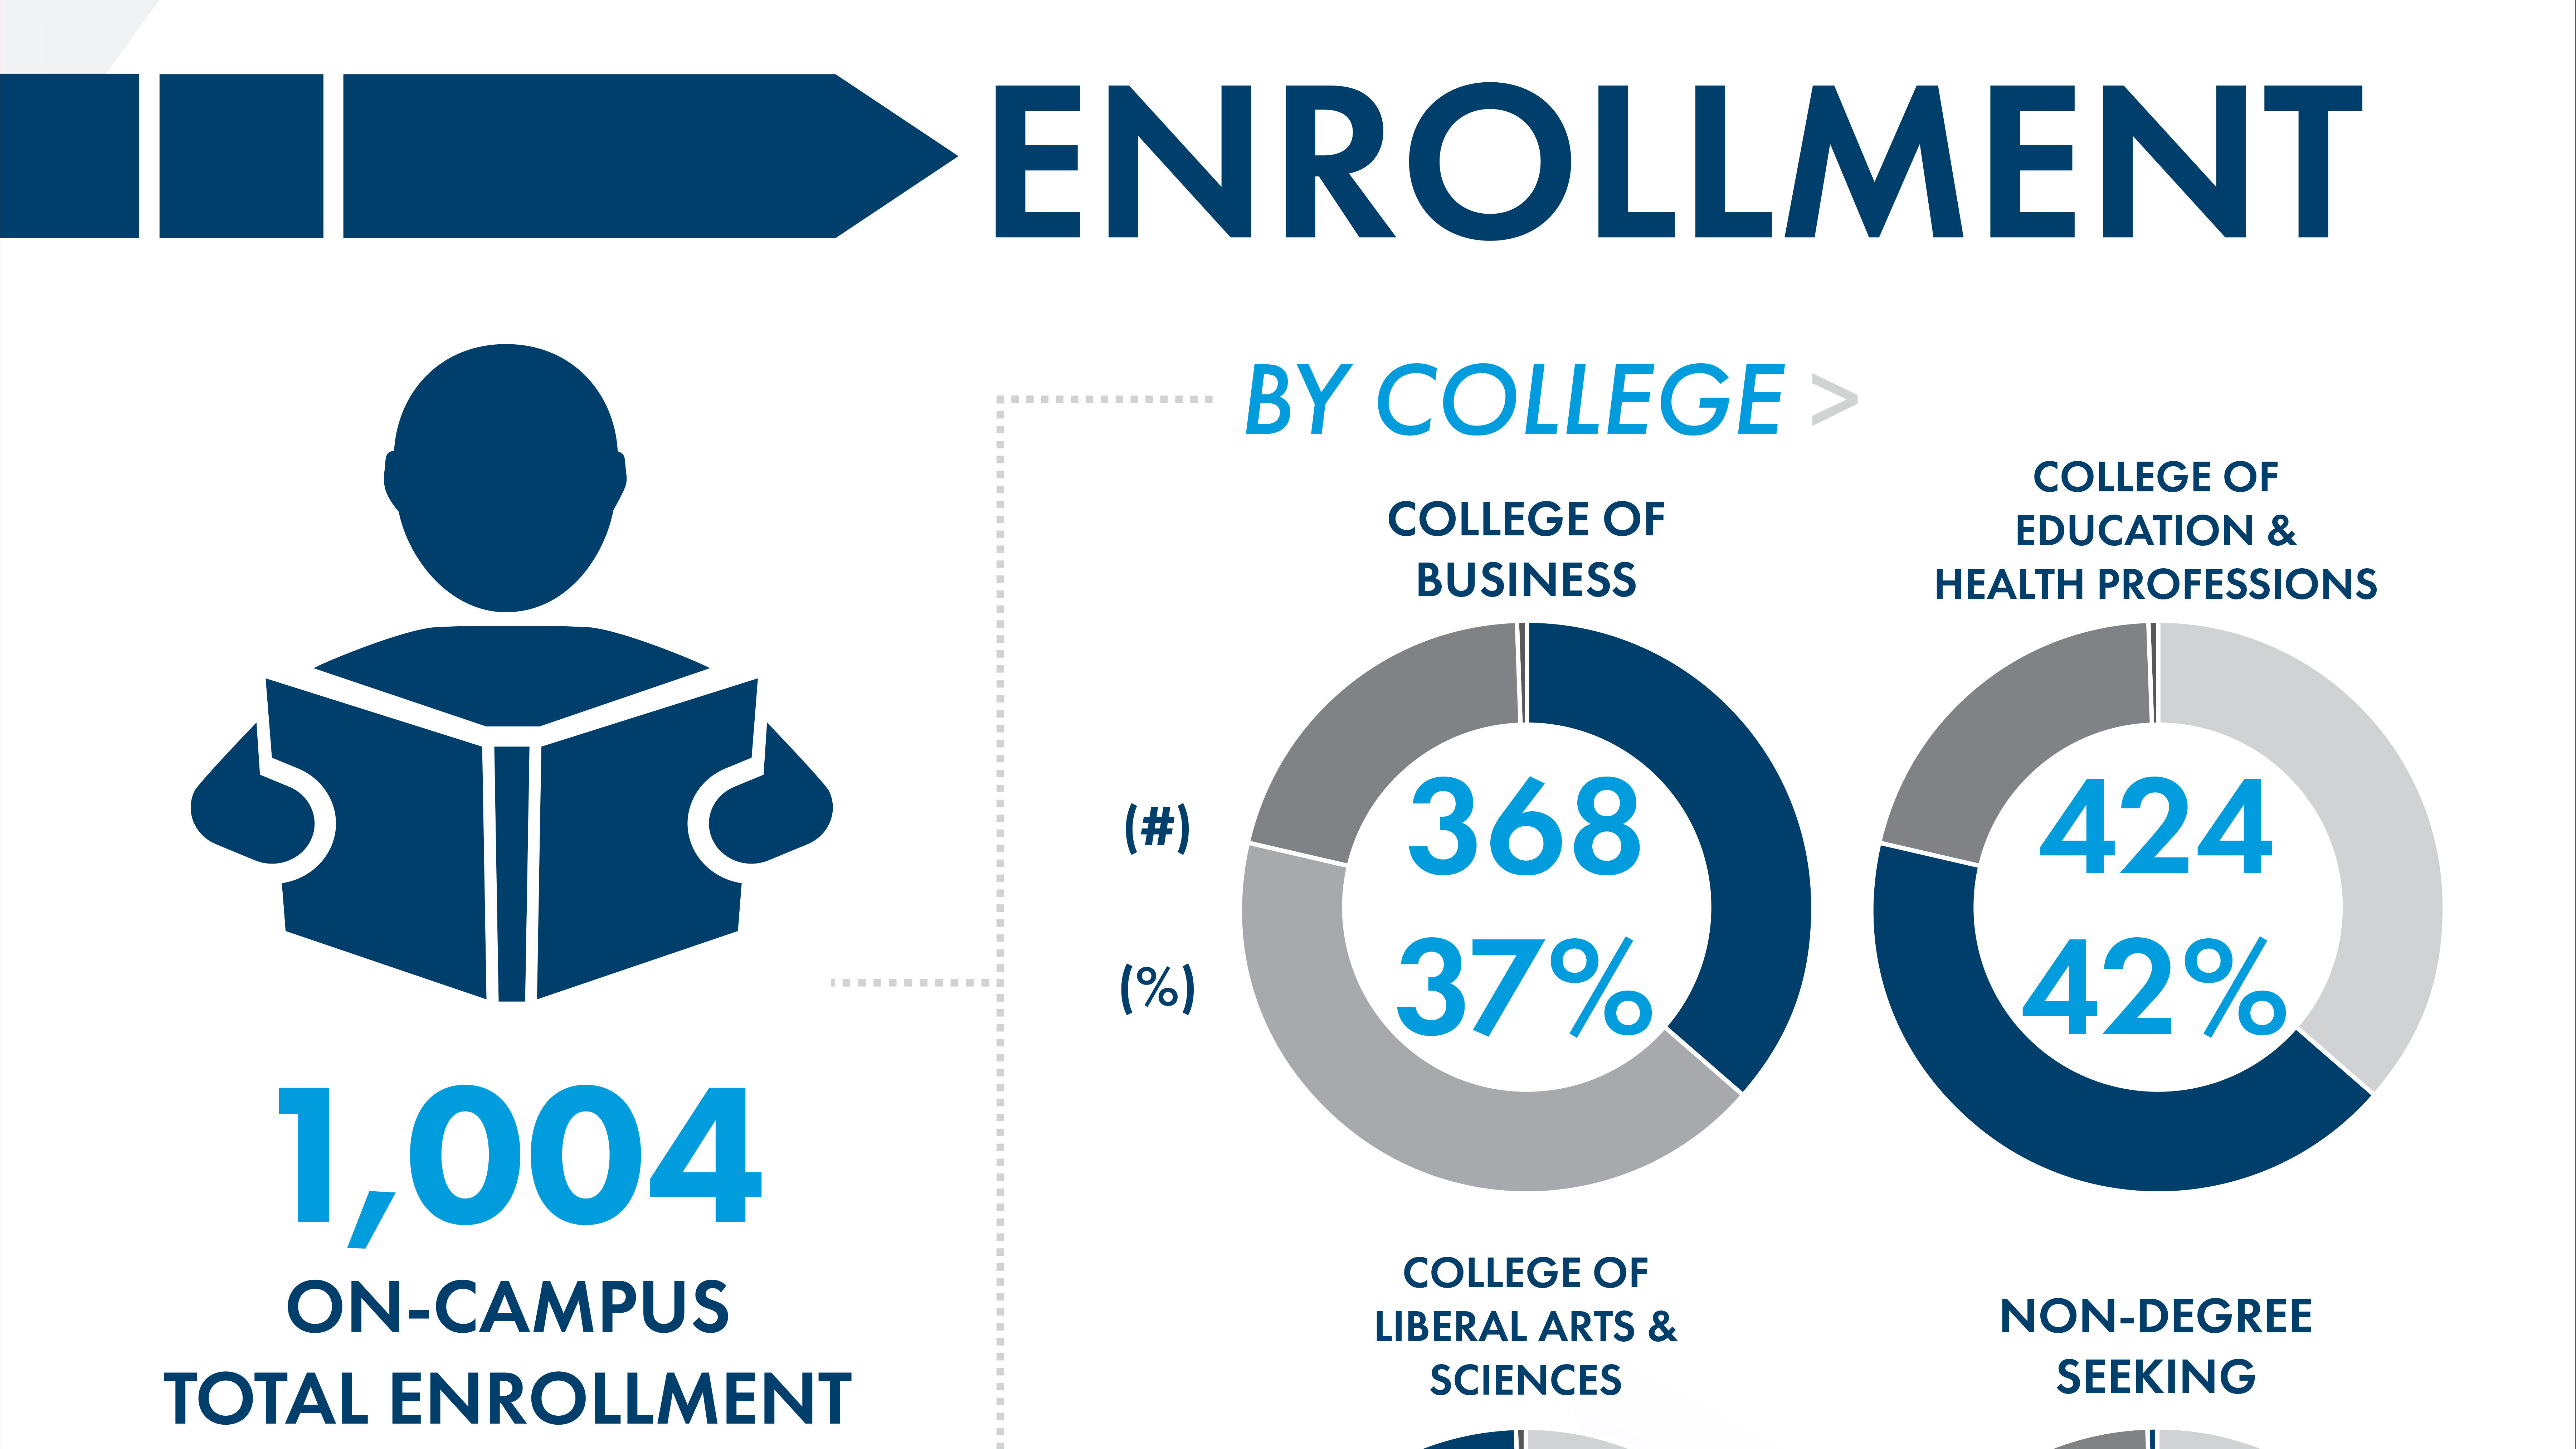 1004 On-Campus Total Enrollment, 59% Male, 41% Female